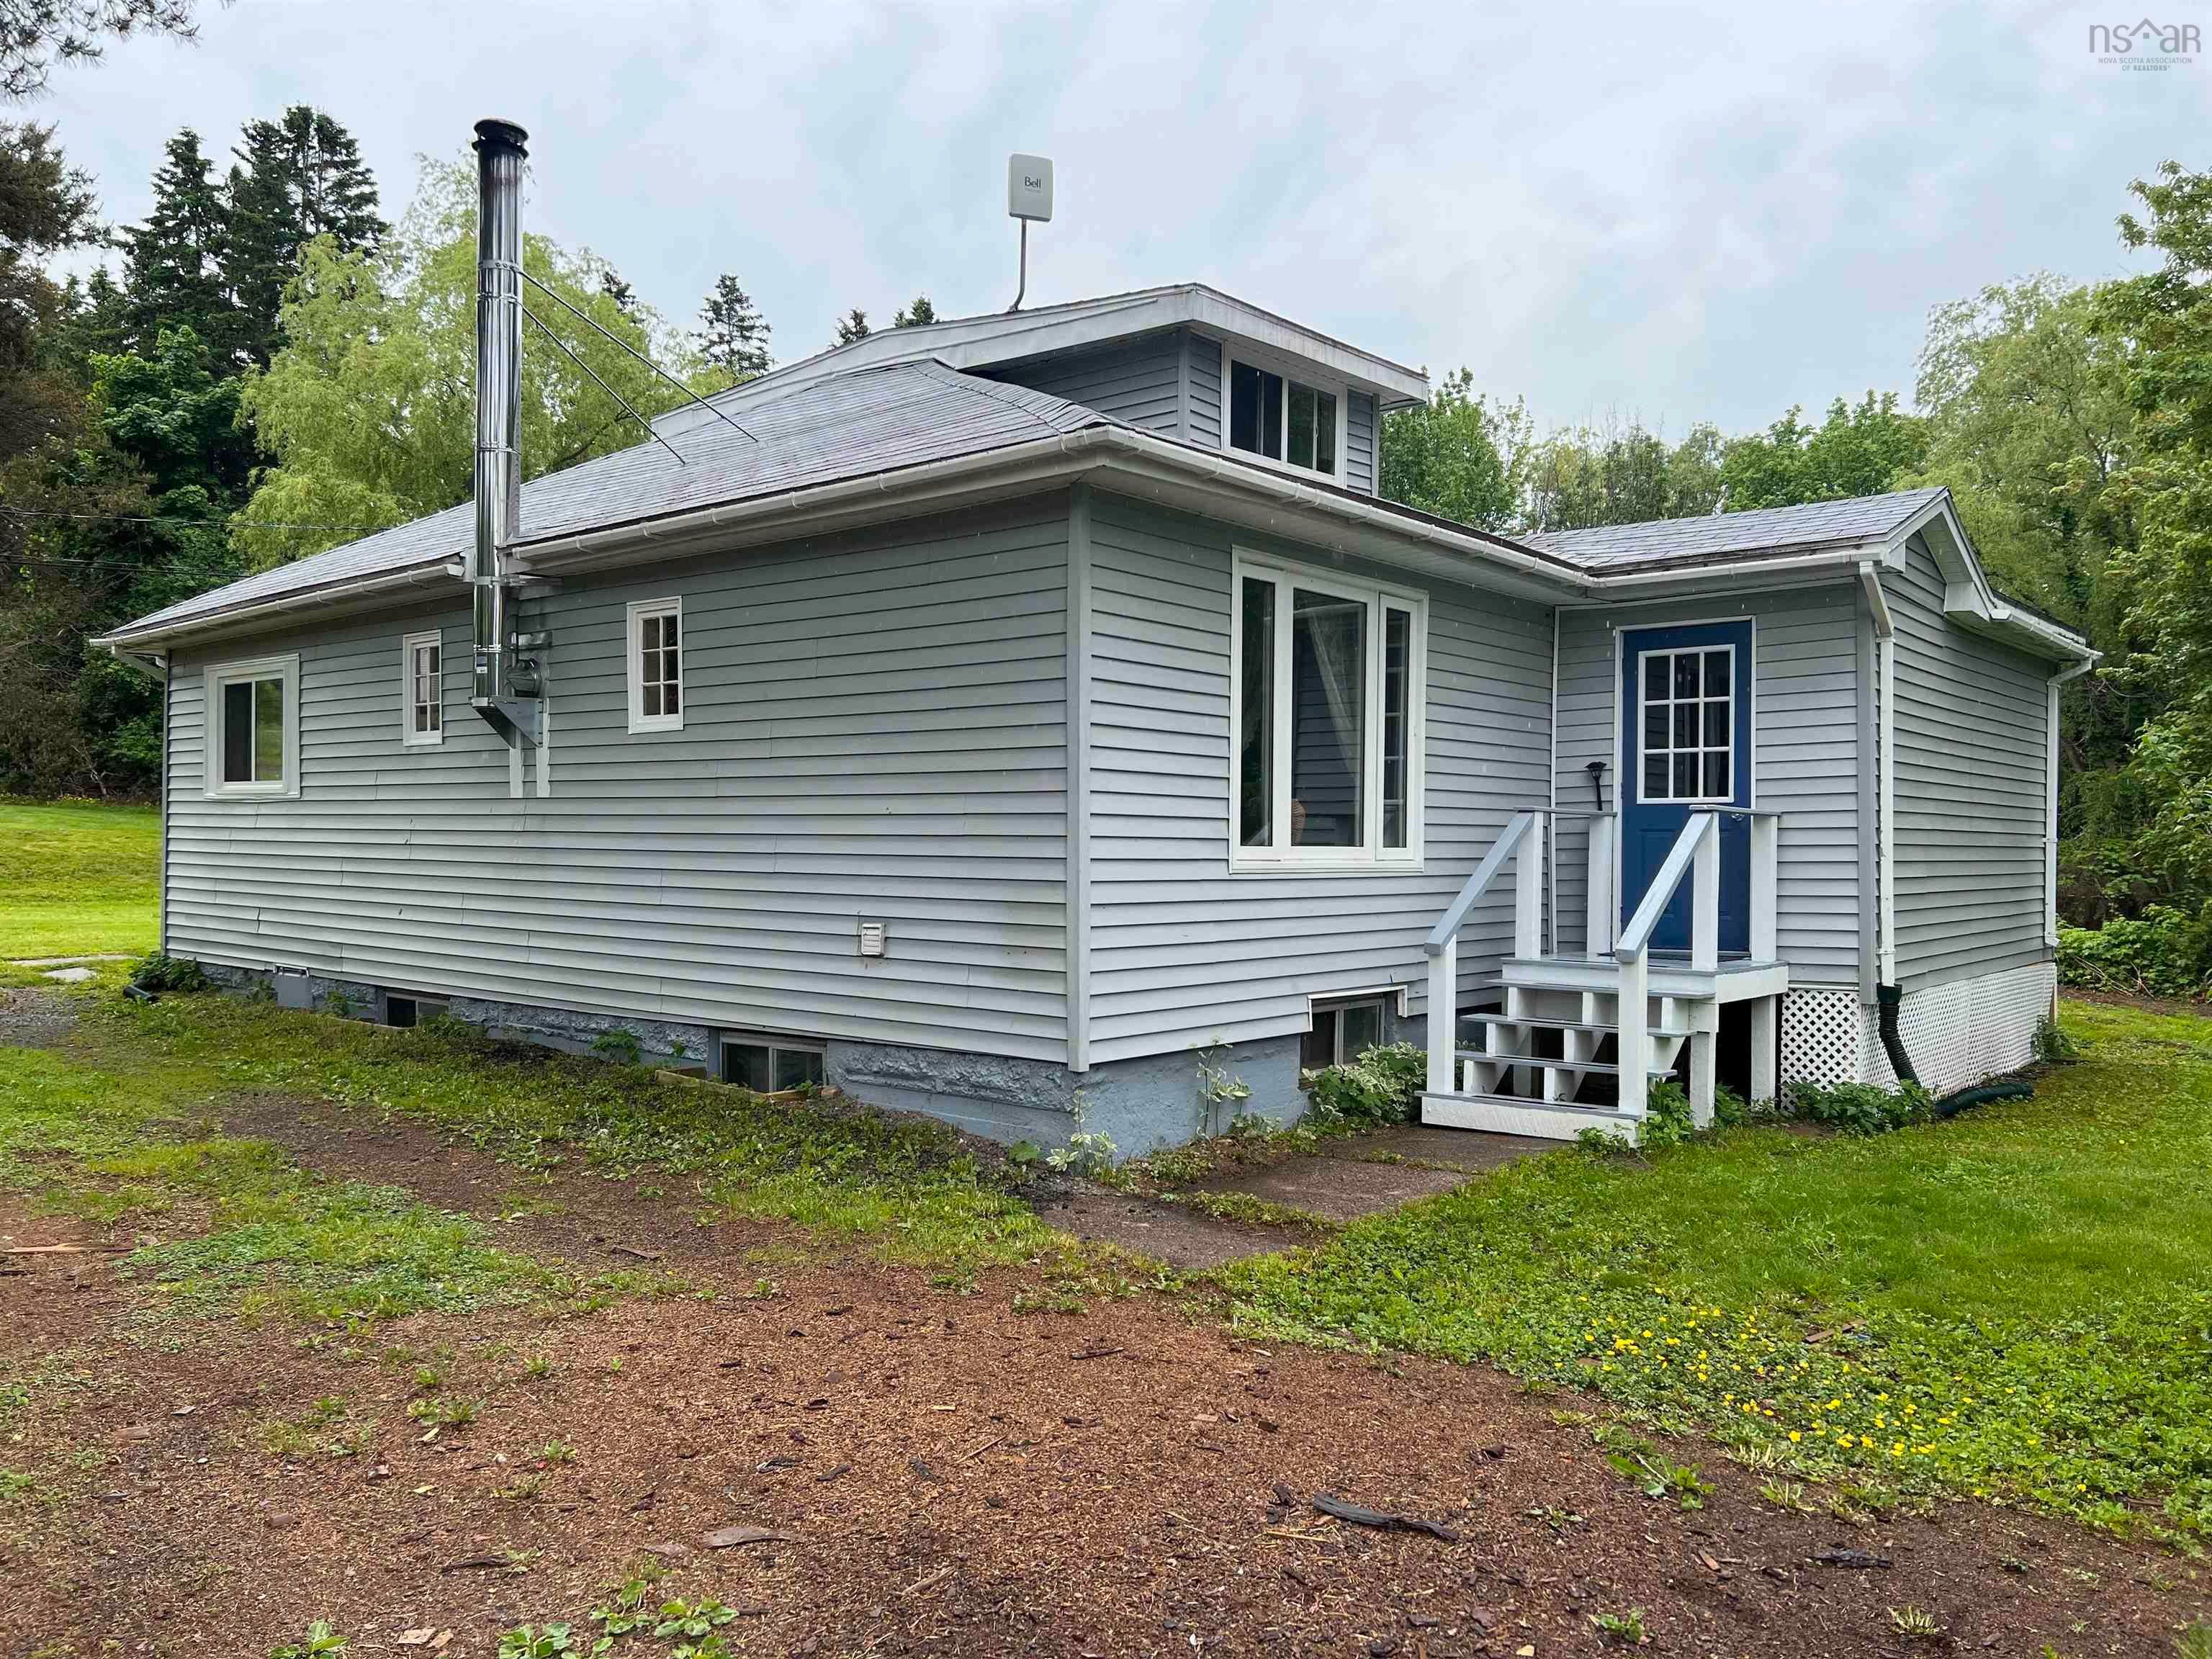 Main Photo: 19 & 25 Sheriffs Drive in Pictou Landing: 108-Rural Pictou County Residential for sale (Northern Region)  : MLS®# 202214052